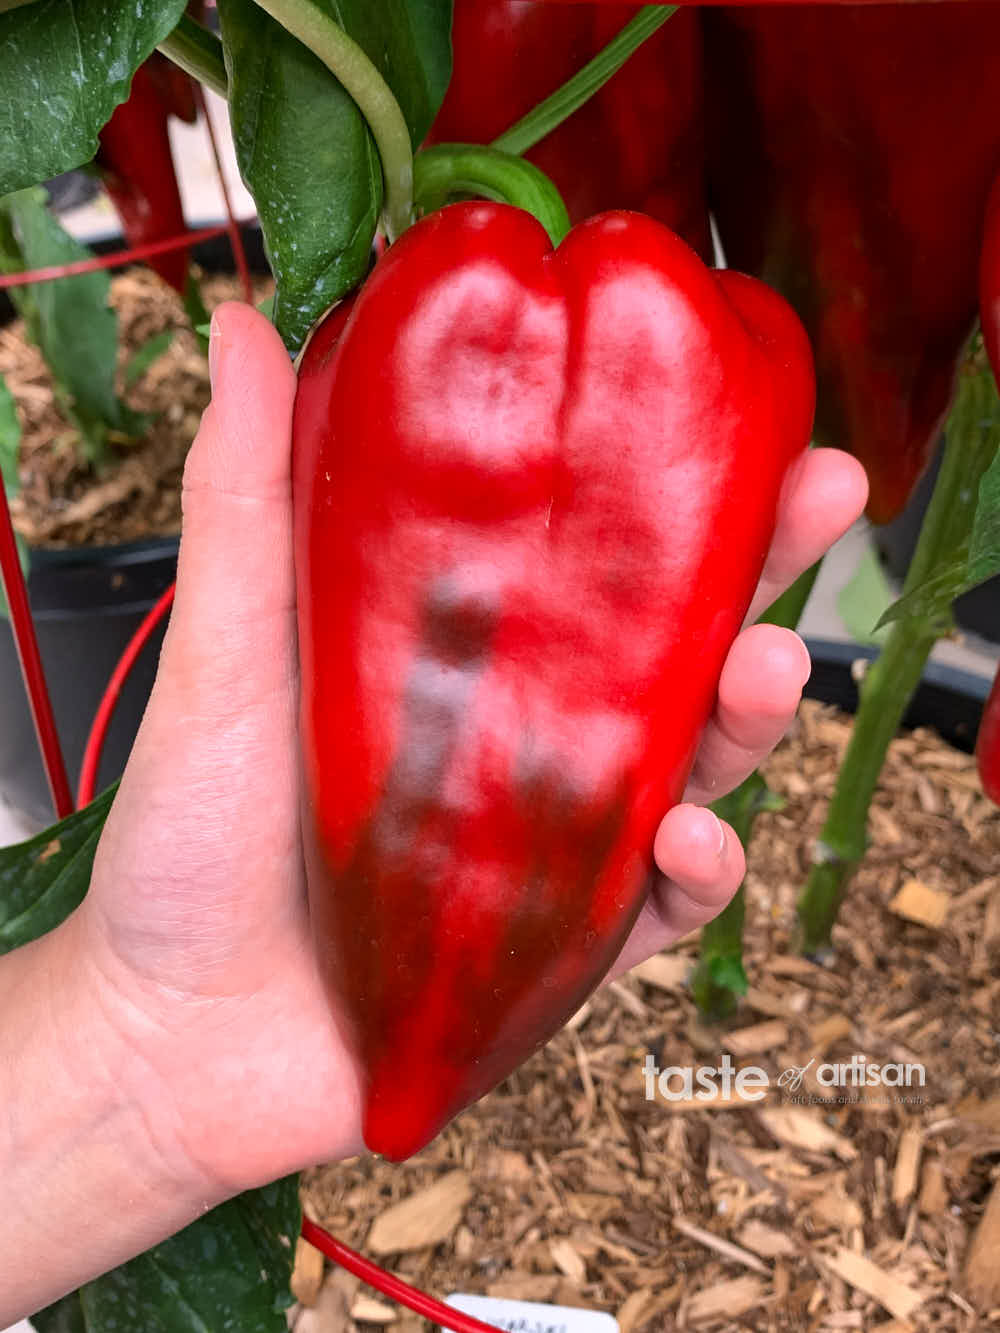 A large, red Ajvarski pepper on a person's palm.